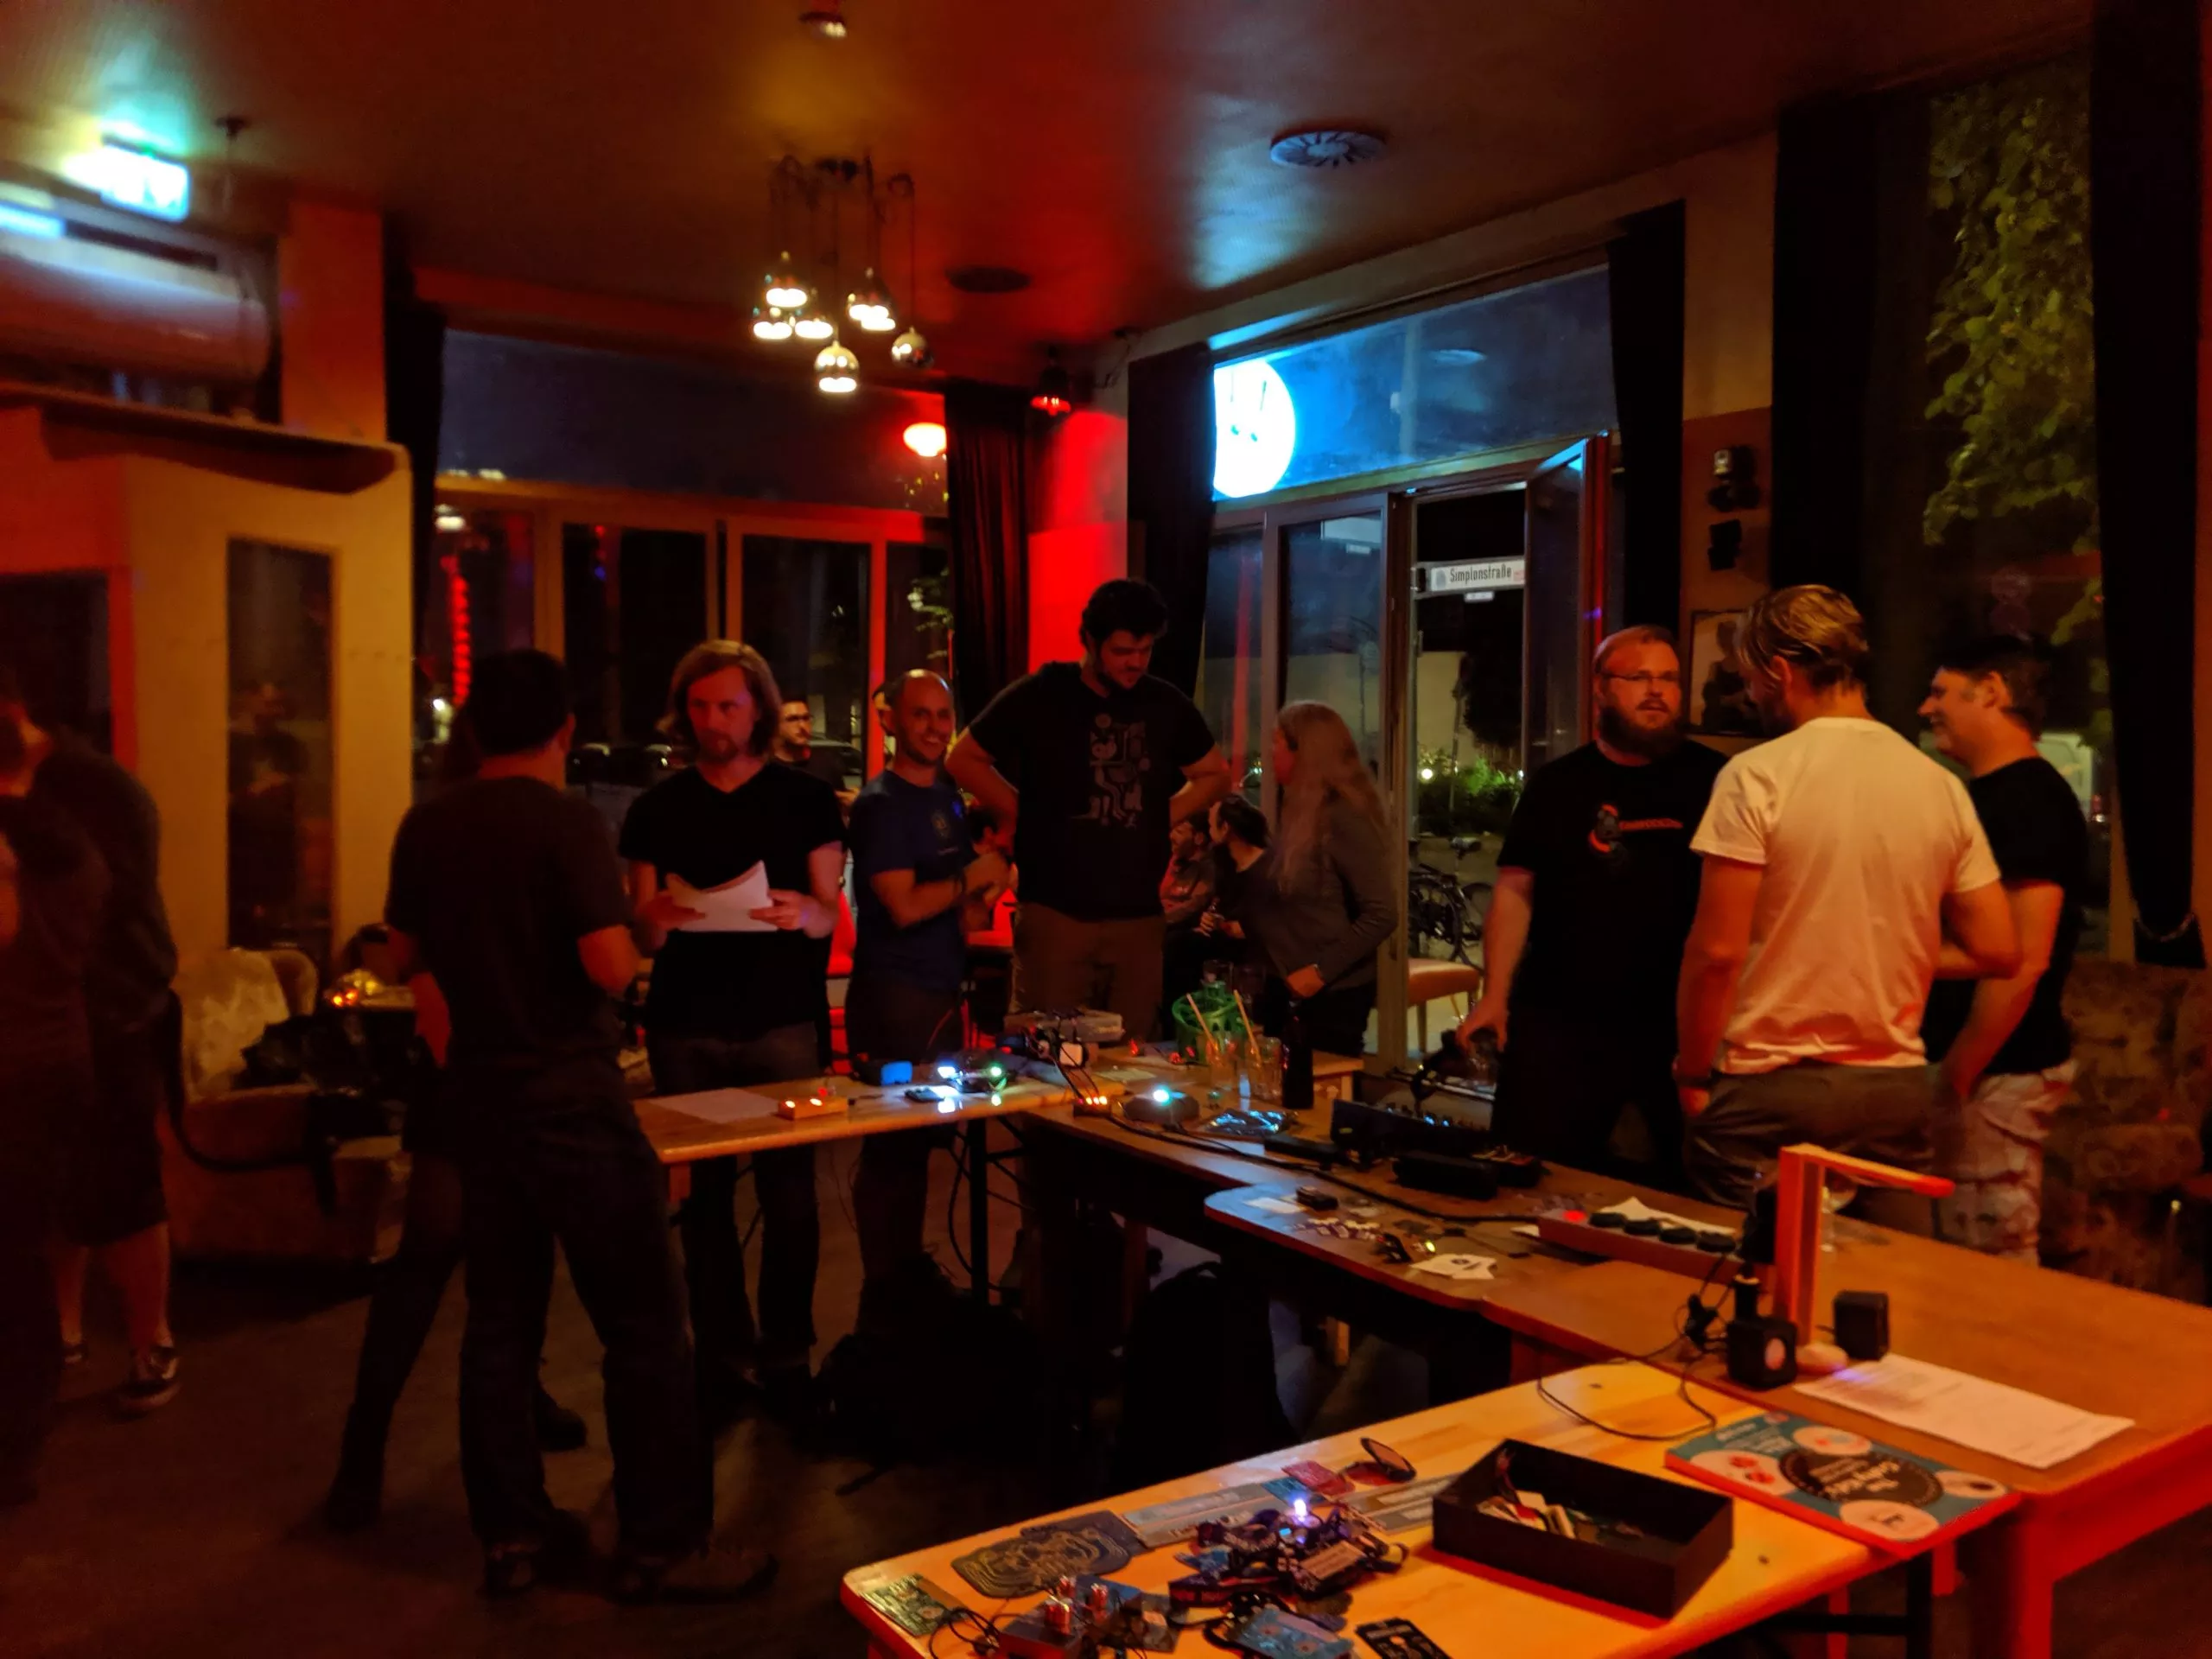 Chicago to host the first virtual Hardware Happy Hour on April 2nd, 2020